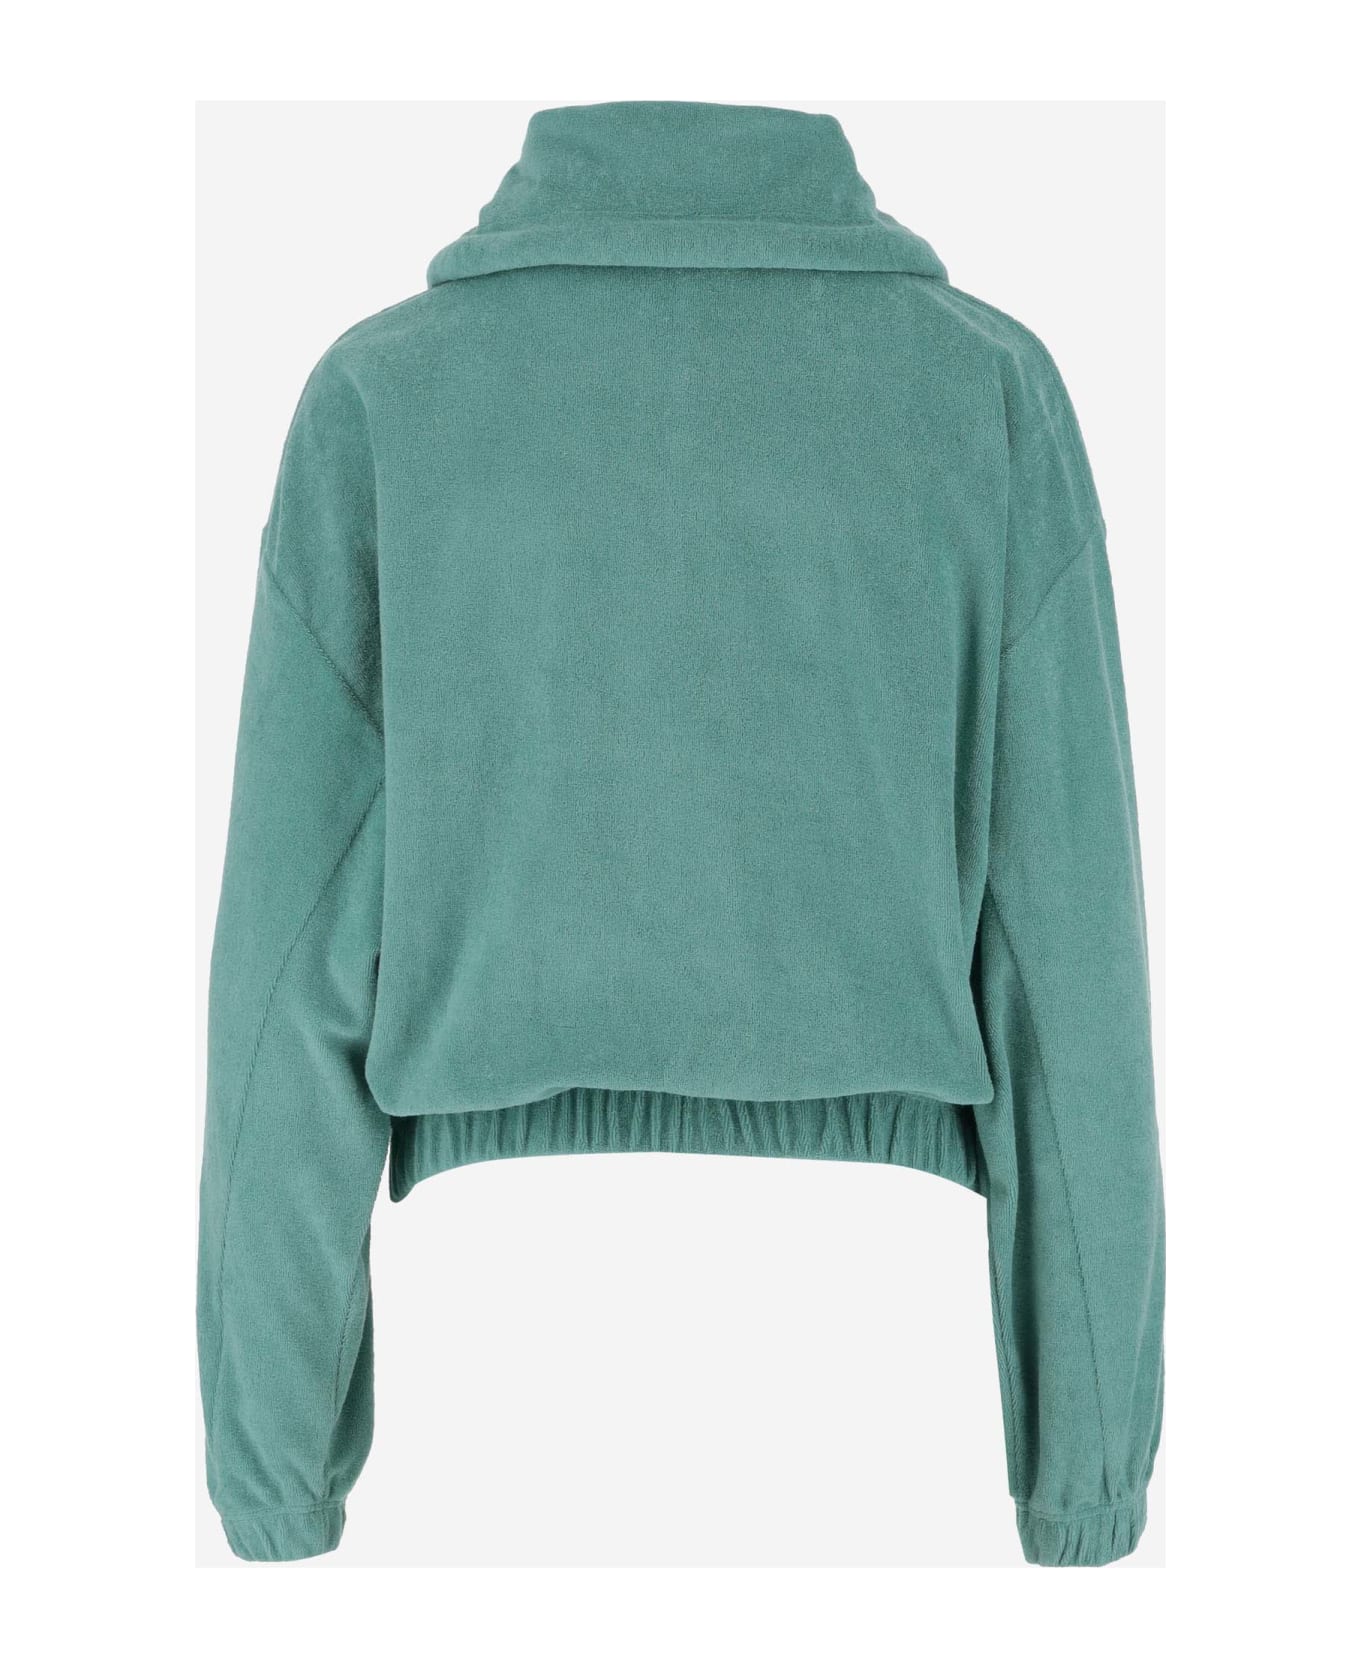 Patou Cotton Sweatshirt With Embossed Patou Signature - Green ニットウェア